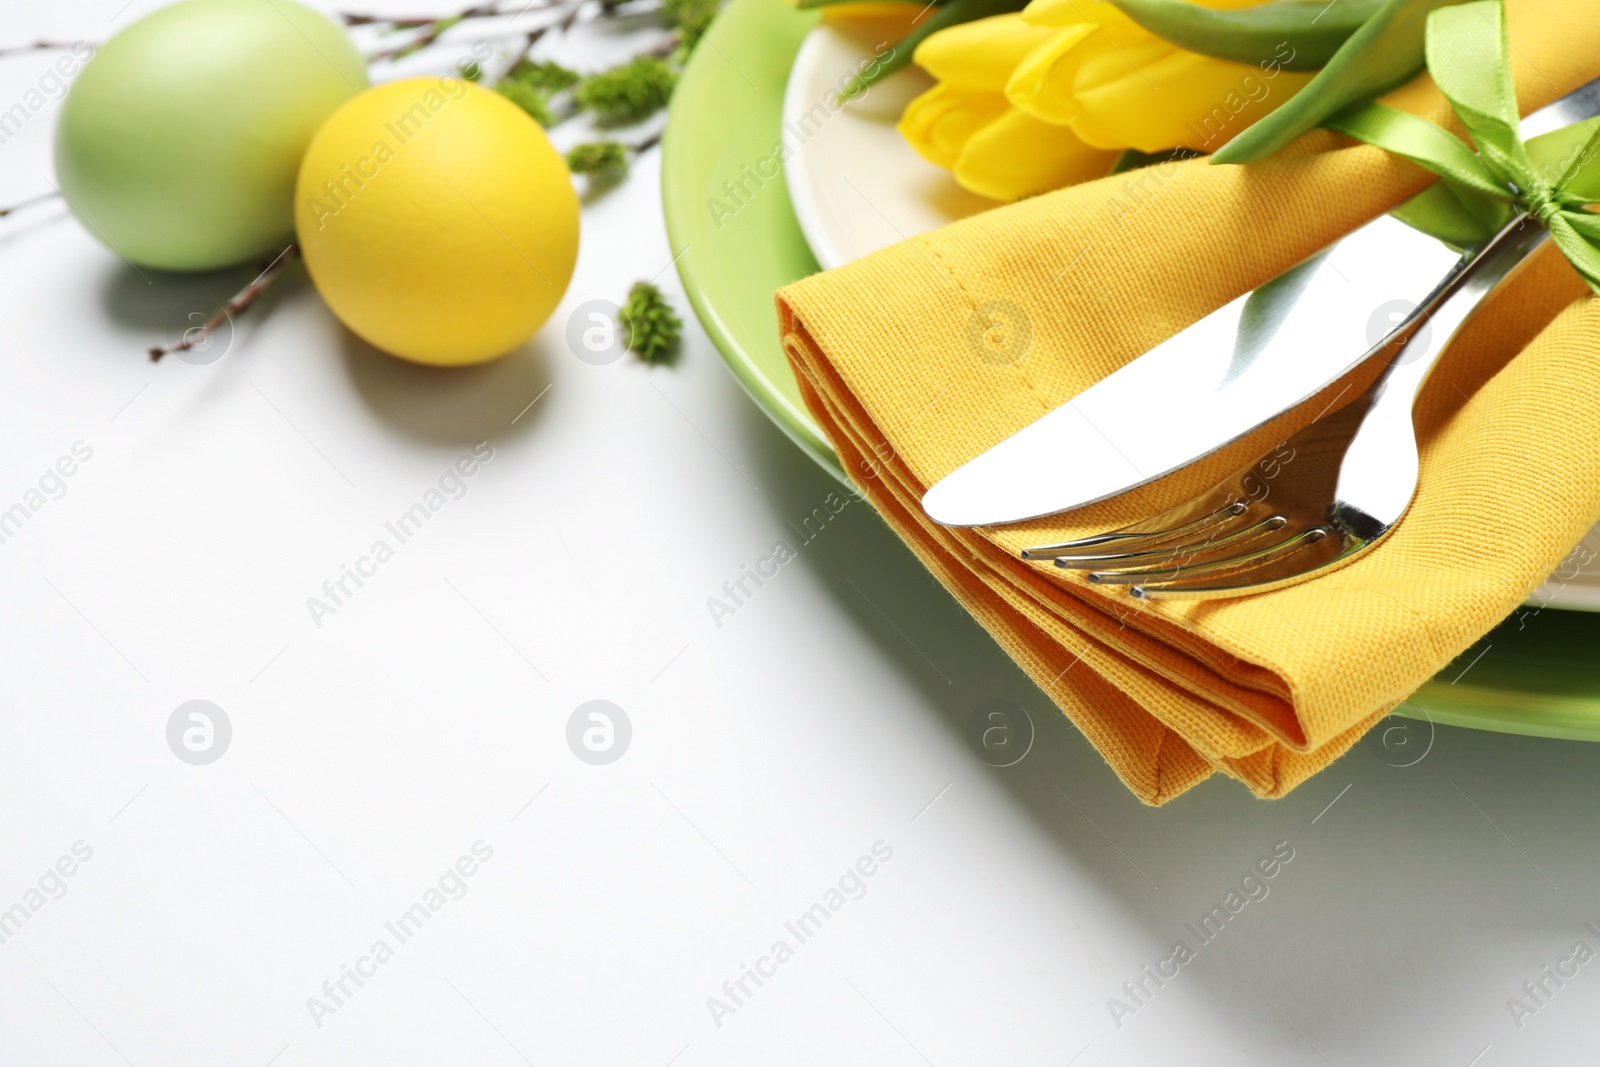 Photo of Festive Easter table setting with floral decor on white background, closeup